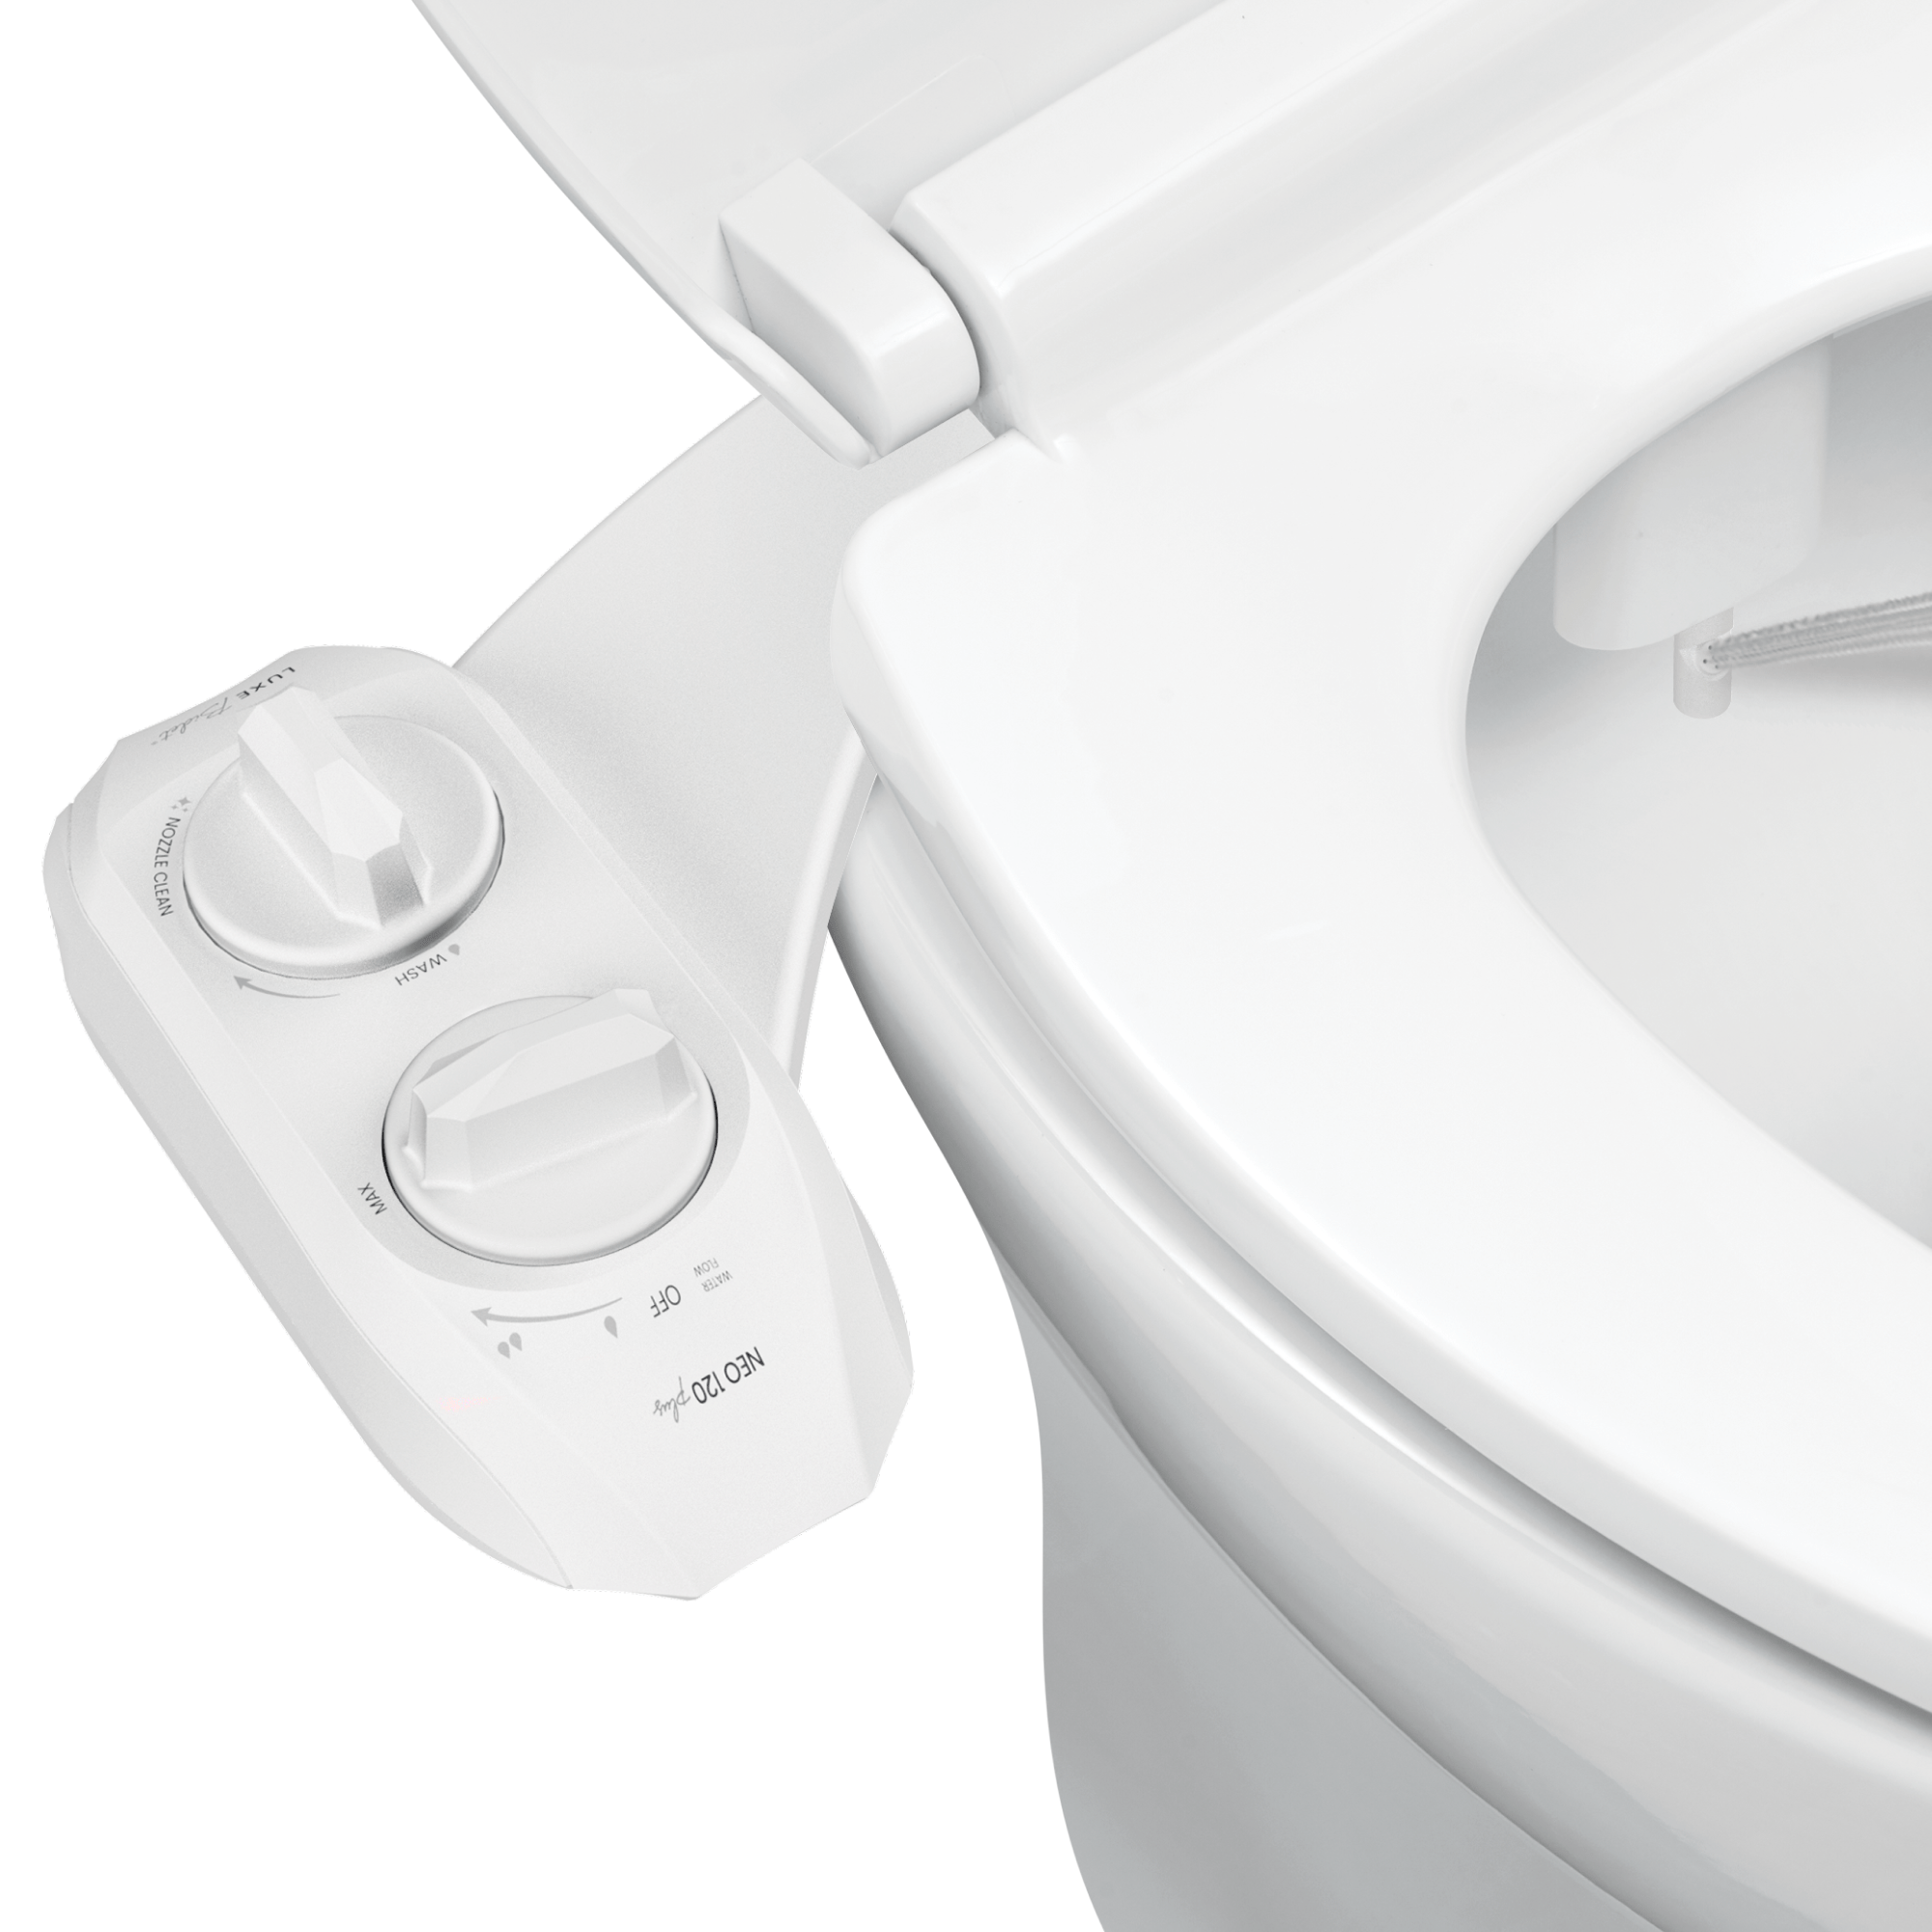 NEO 120 Plus: Imperfect Packaging - NEO 120 Plus White installed on a toilet with water spraying from nozzles